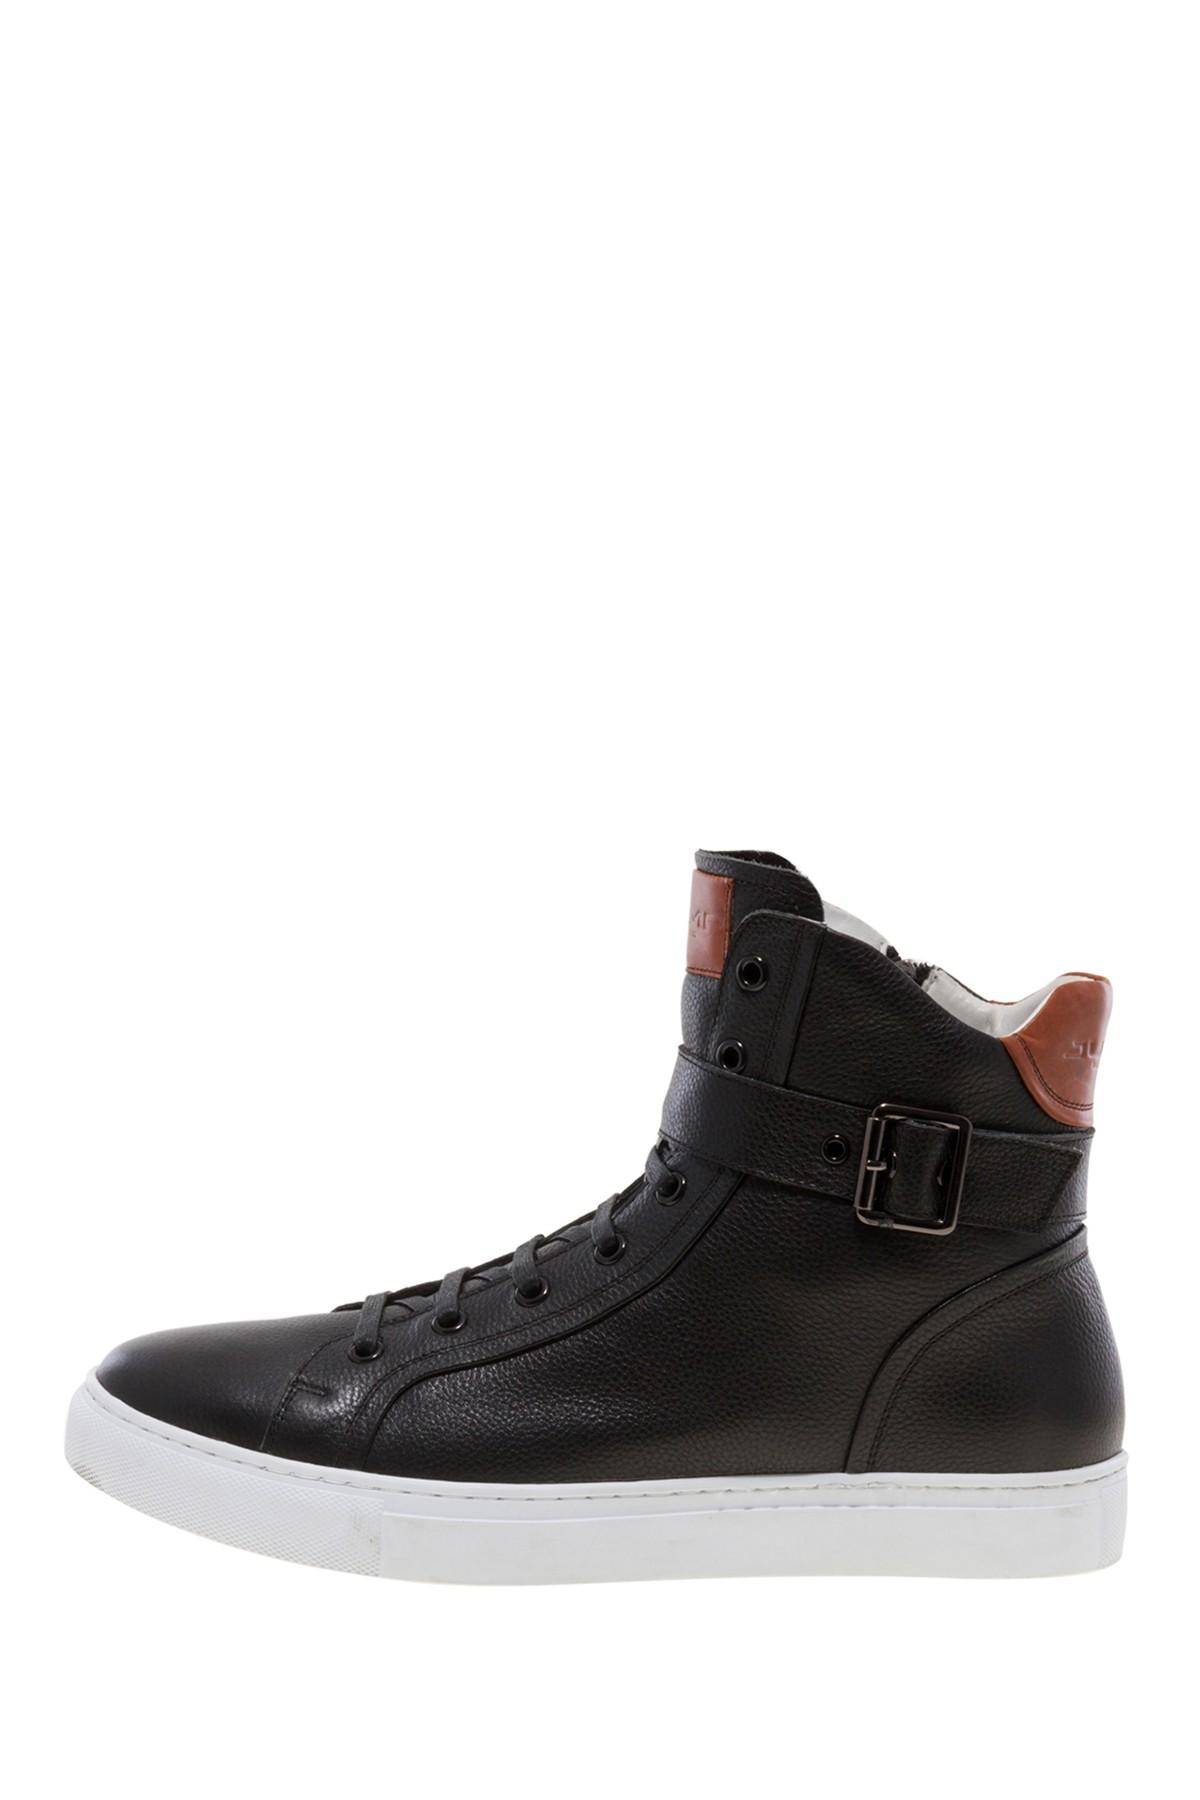 Jump Suede Bloke Leather High Top Sneaker in Black Leather (Black) for ...